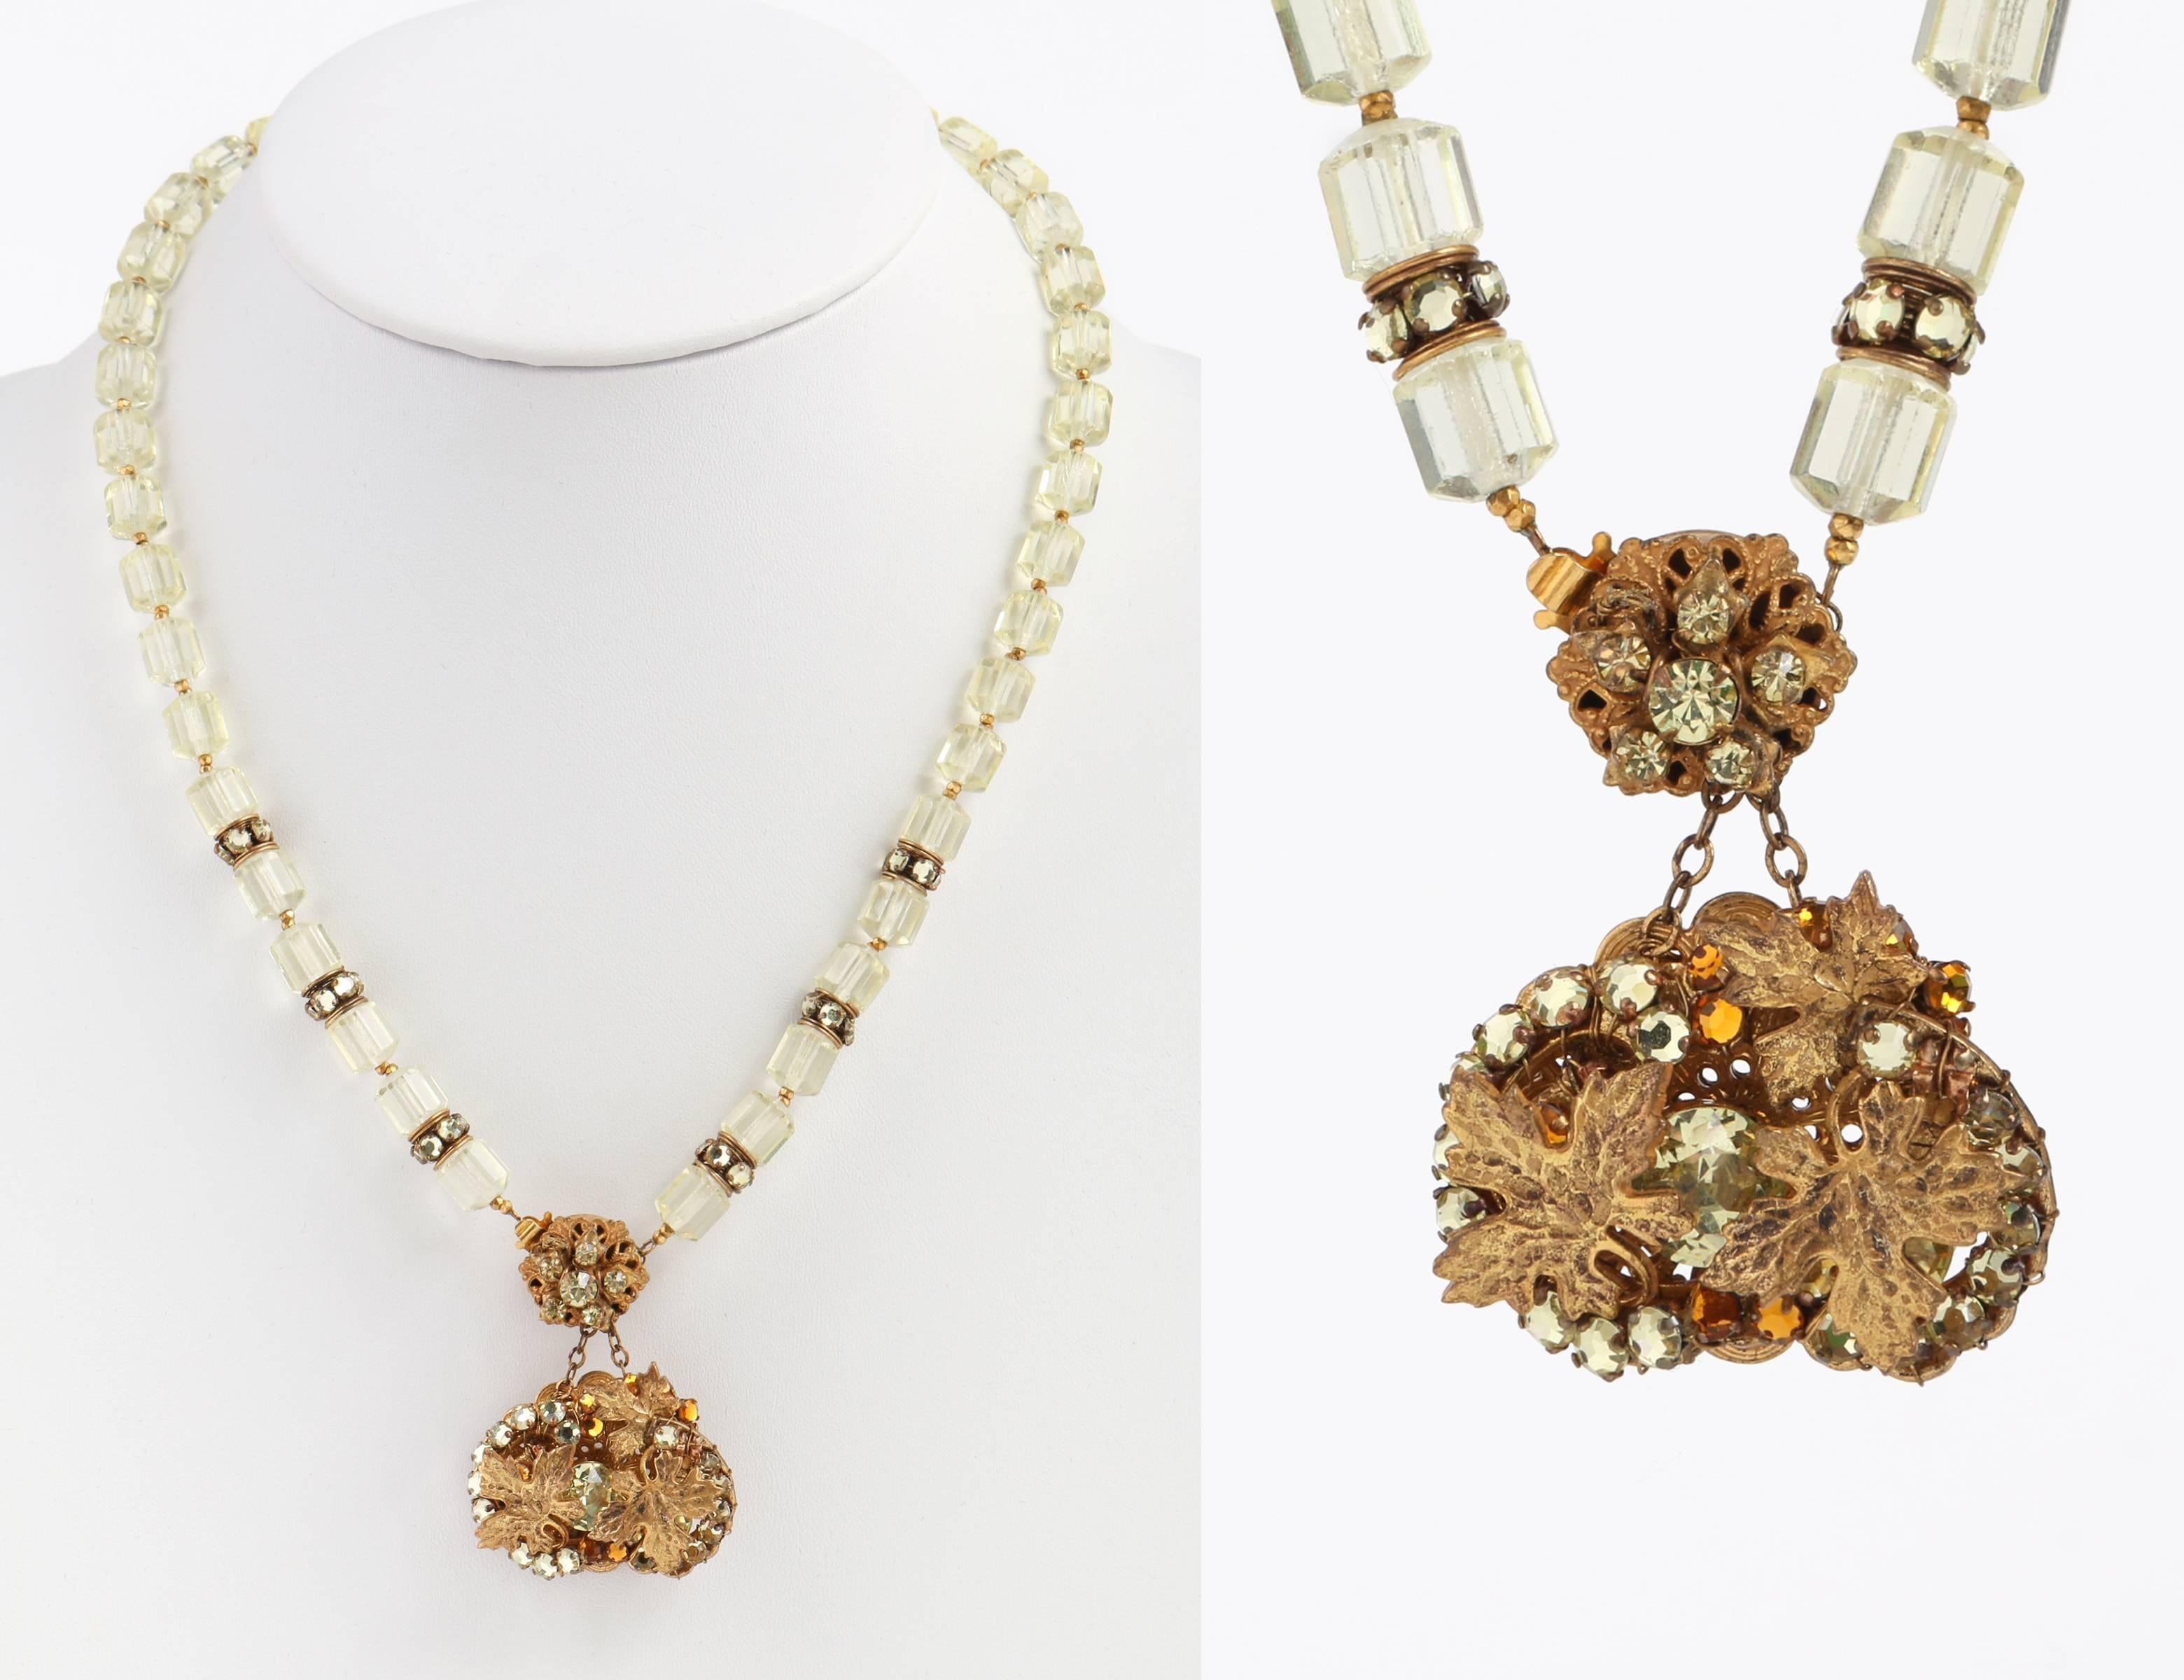 Vintage Miriam Haskell c.1950's gold gilt leaf crystal beads pendant necklace. Crystal clear (with a subtle hint of light green/yellow) cathedral barrel beads (measuring approximately 9 mm) which are linked together with two tiny faceted gold tone